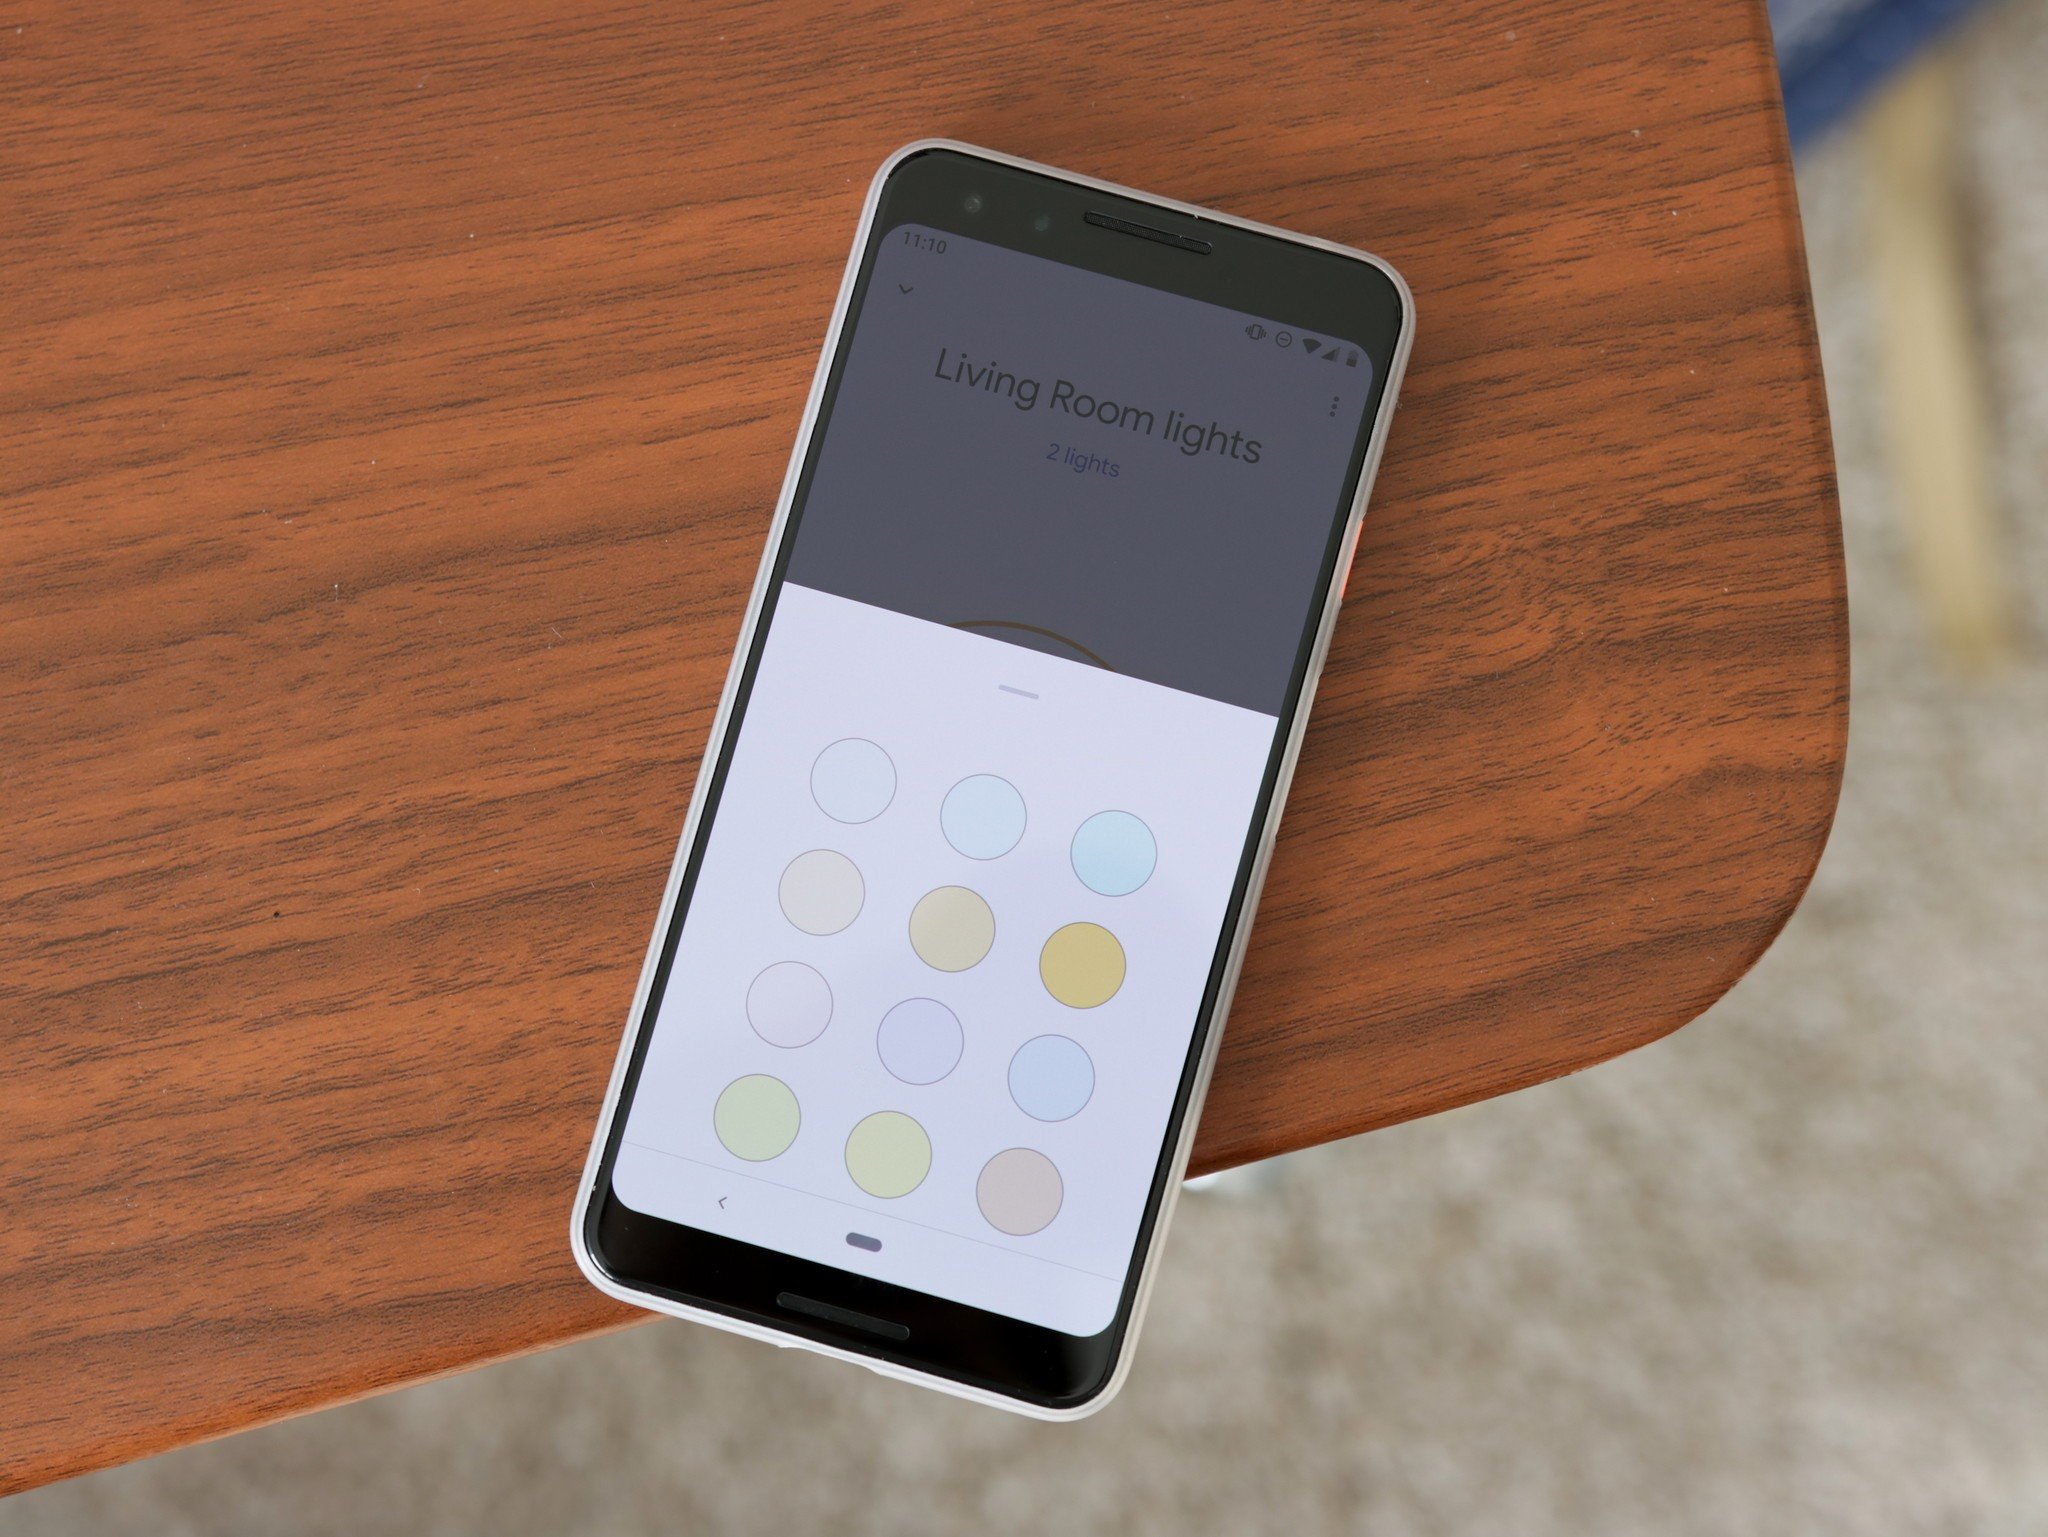 The Google Home app now supports changing the color of smart lights